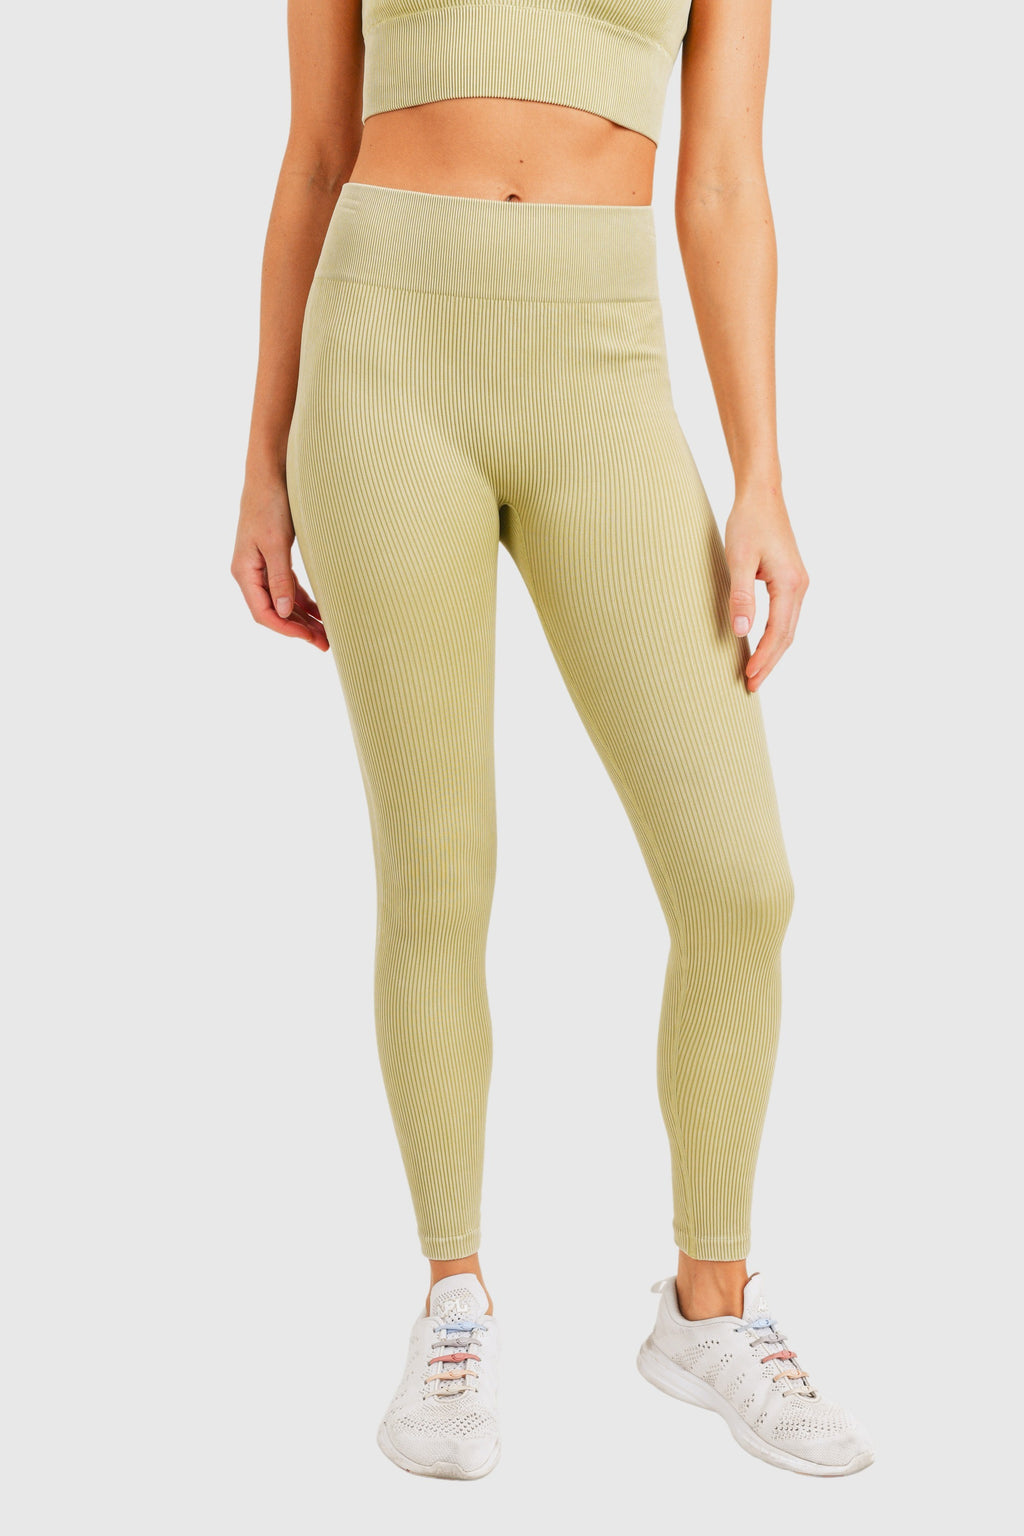 Outdoor Voices Techsweat Leggings in White Sand – Series